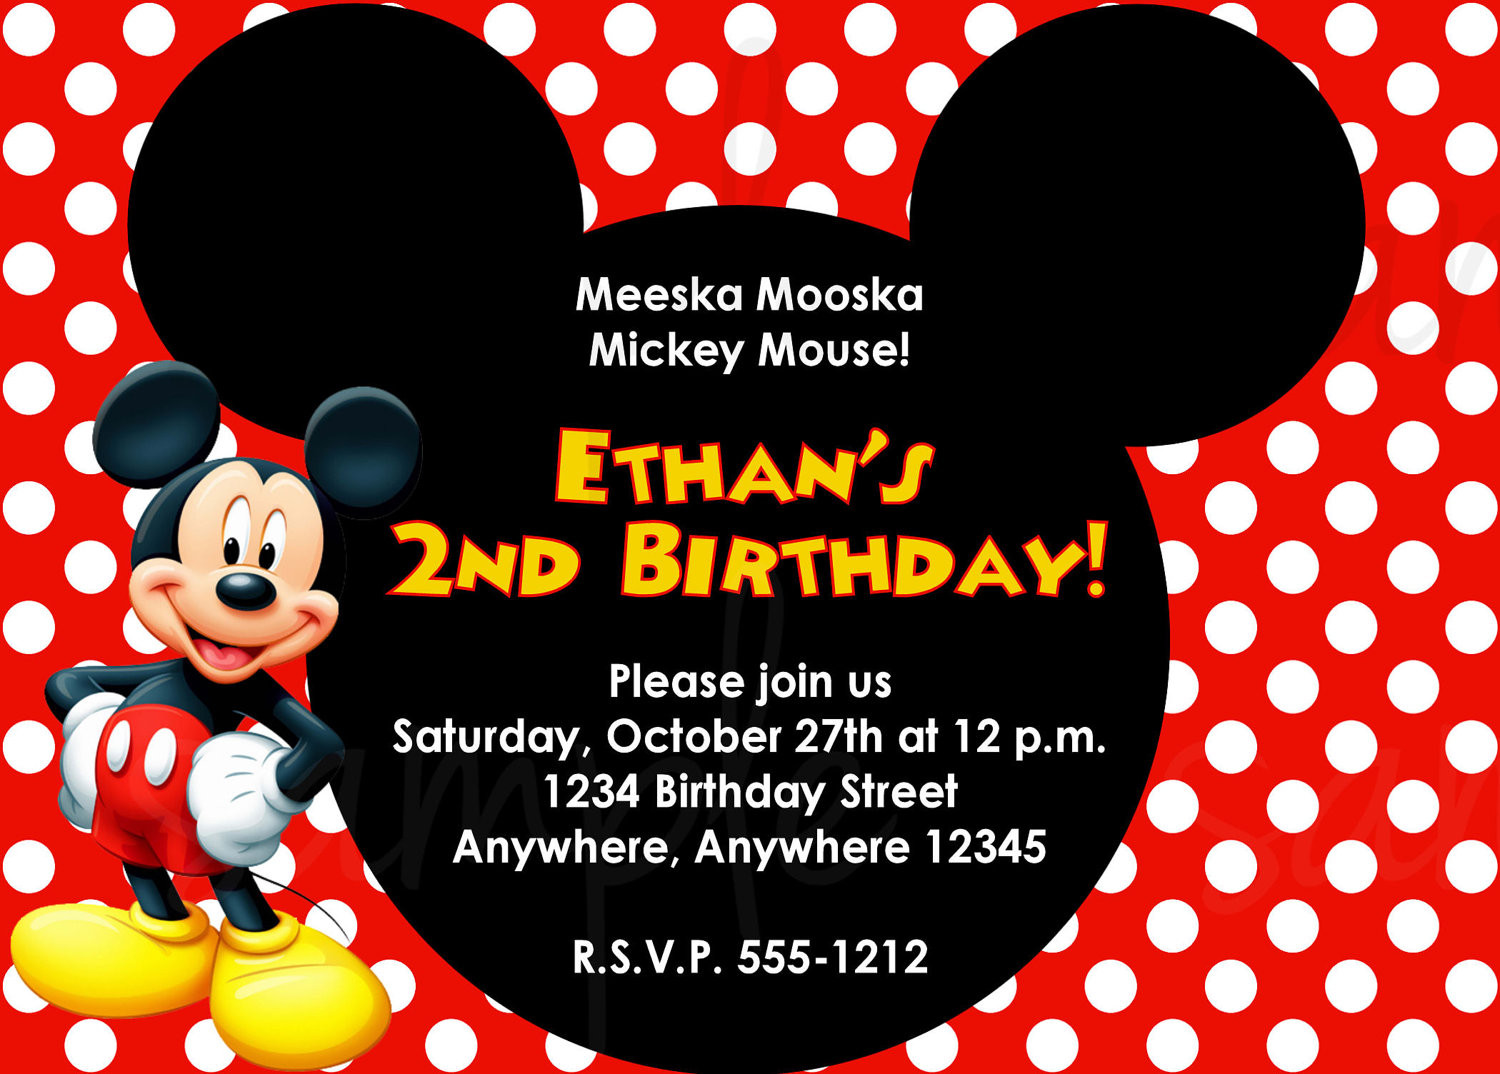 Mickey Mouse 1st Birthday Invitations
 How to write Invitation Card in less than 5 Minutes – FREE